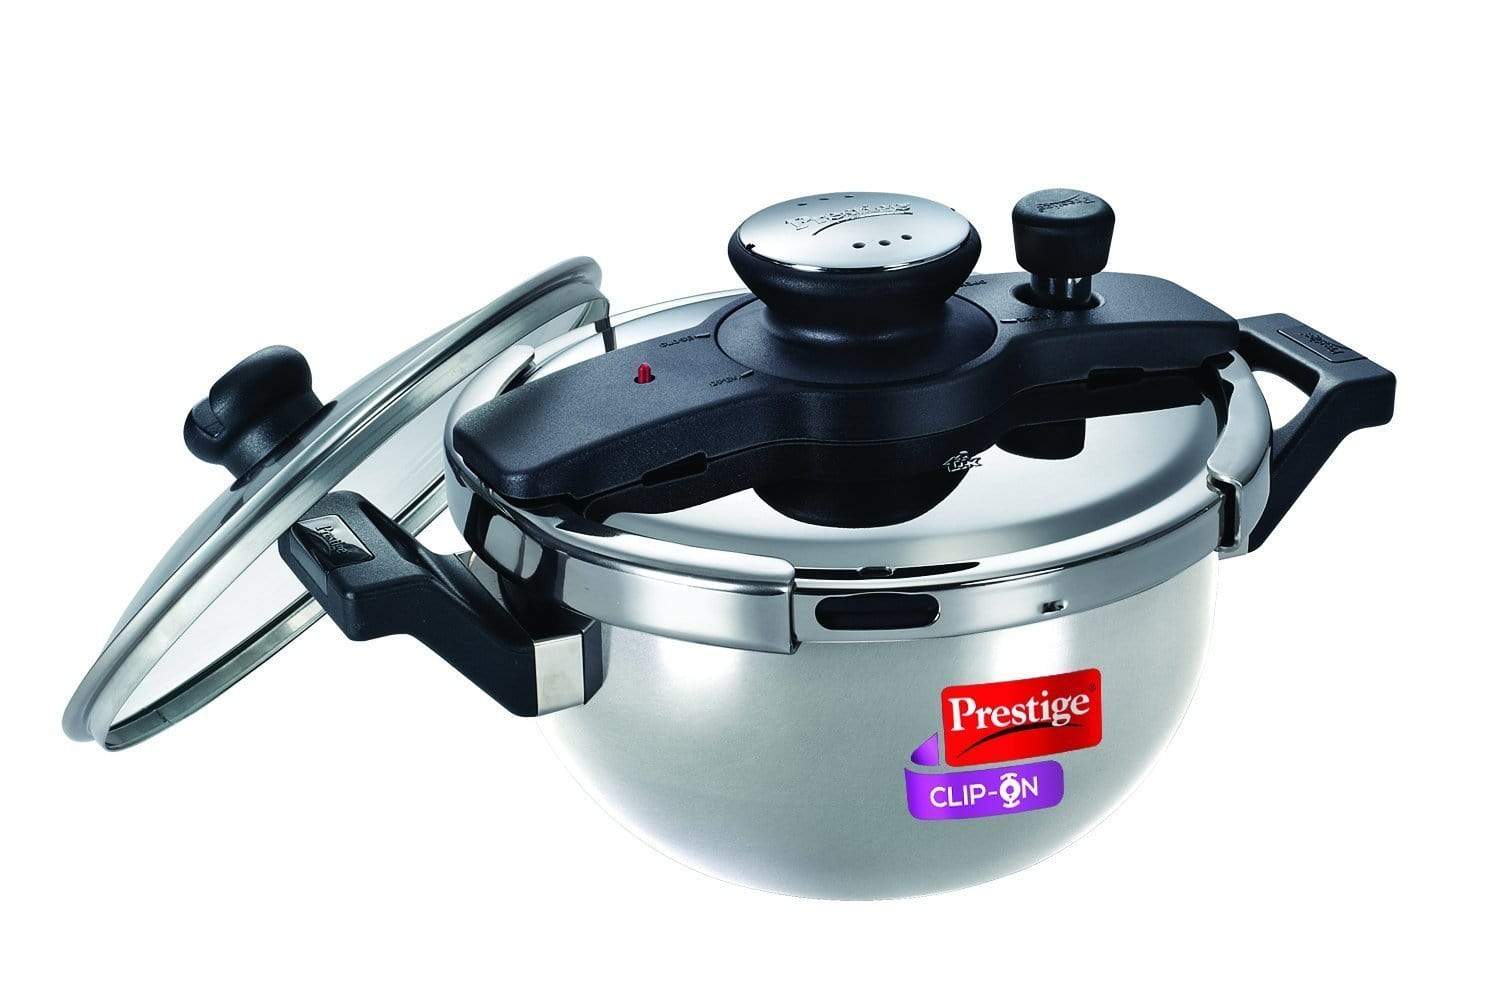 https://kitchenmart.co.in/cdn/shop/products/prestige-clip-on-stainless-steel-pressure-cooker-with-glass-lid-kadai-8901365256540-prestige-clipon-cooker-ss-kadai-4620716179546_1600x.jpg?v=1607272320